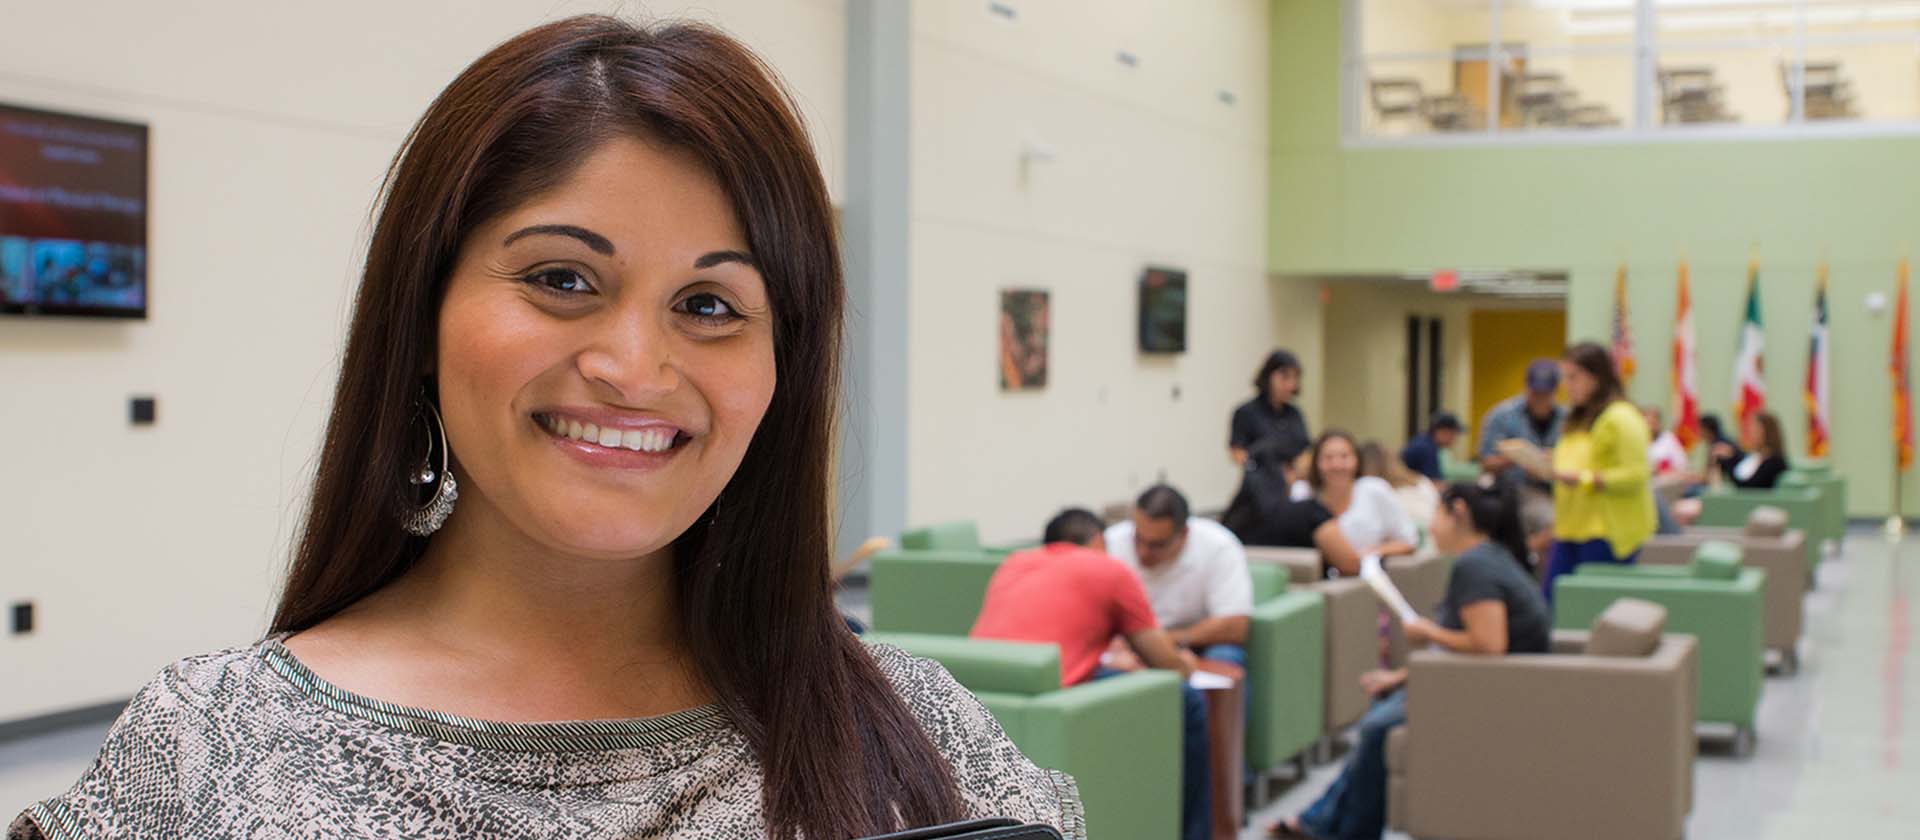 photo of woman smiling to the camera as people sit in the background to her left